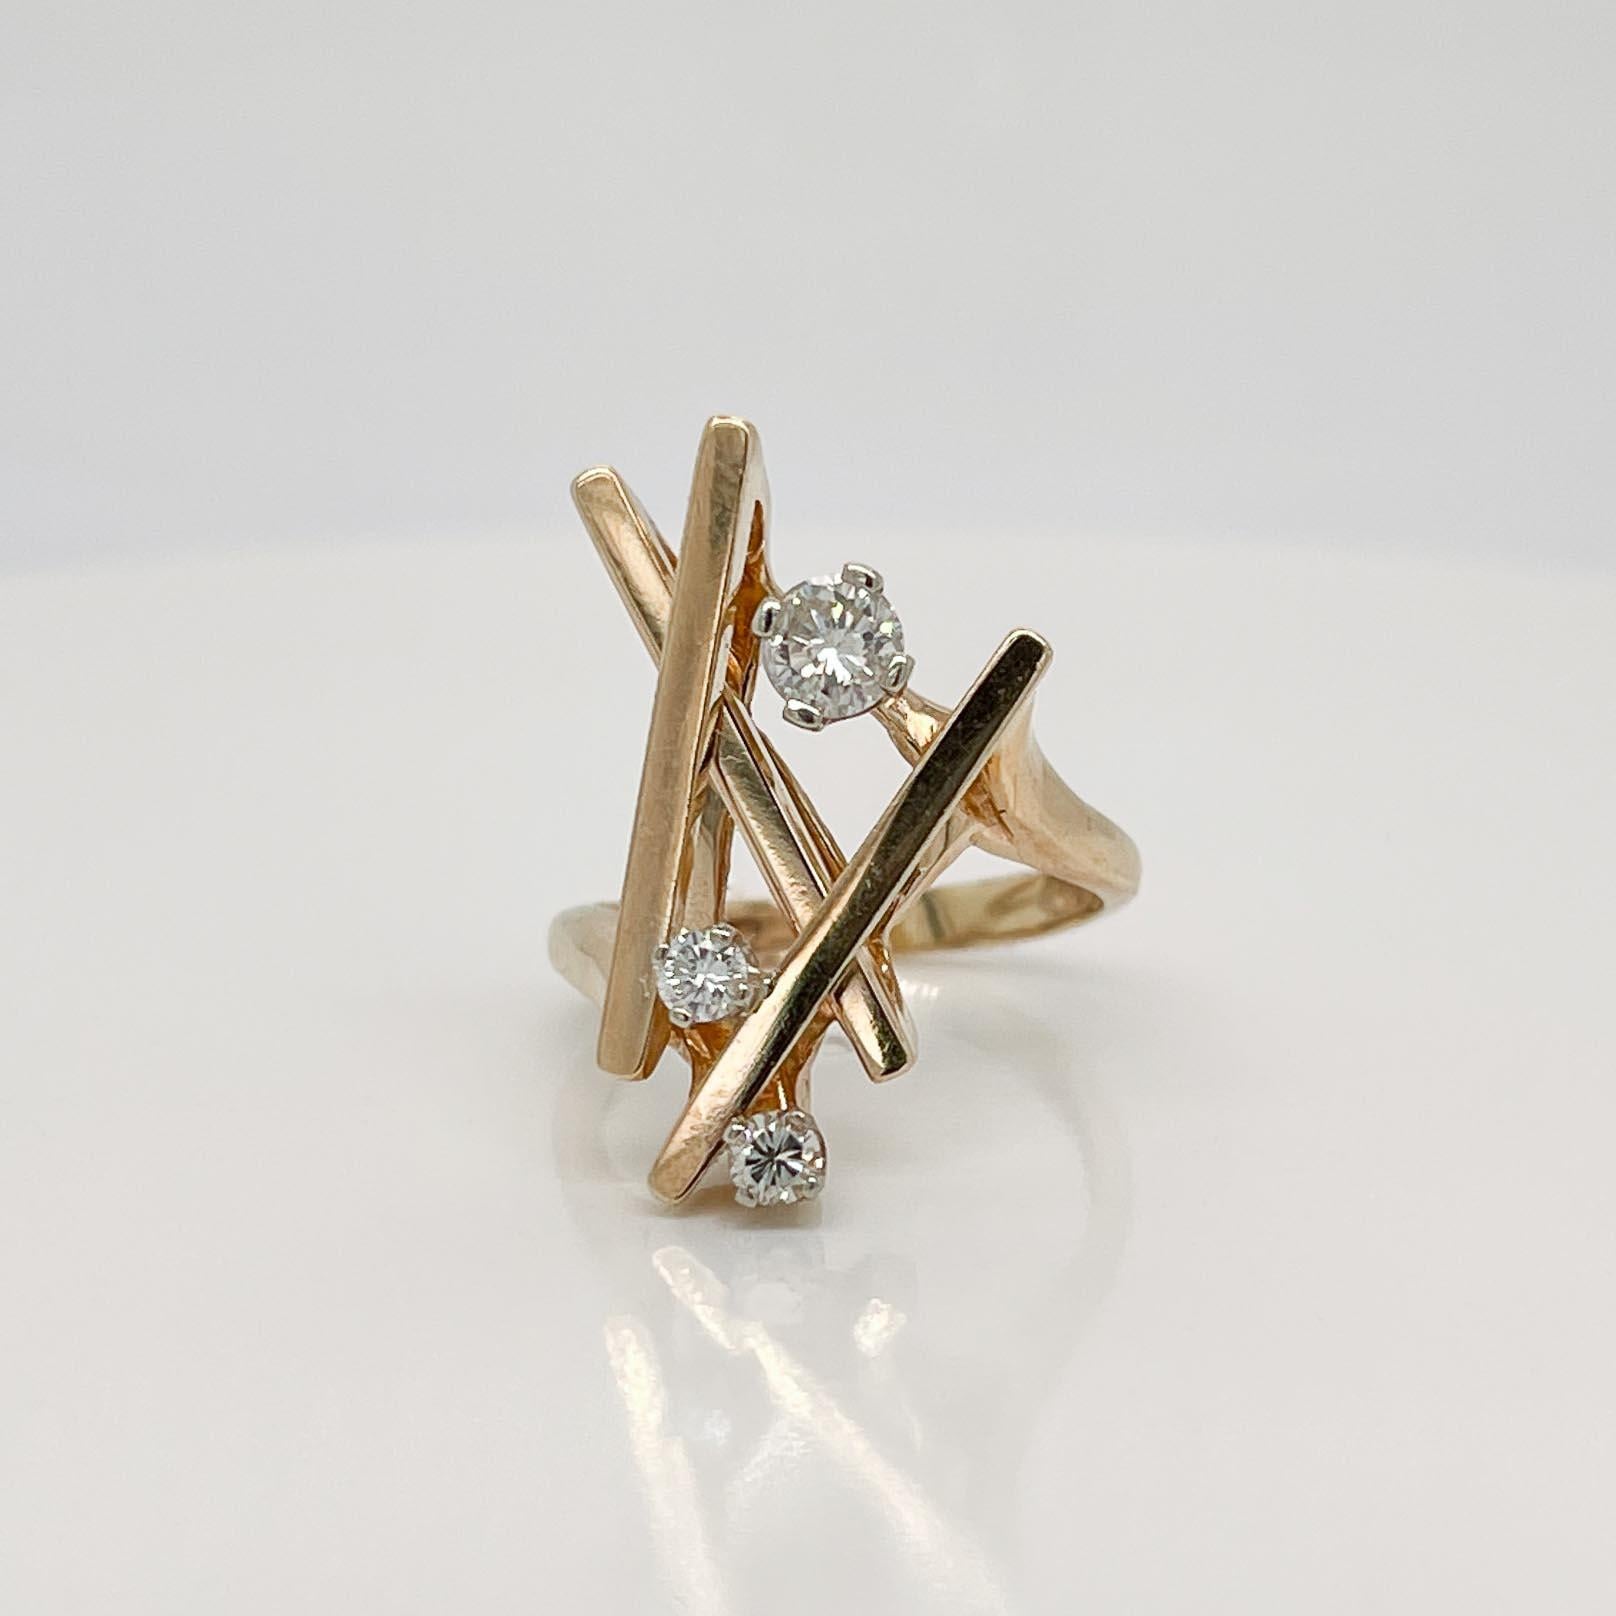 Signed Hammerman Bros Modernist 14 Karat Gold & Diamond Cocktail Ring  In Good Condition For Sale In Philadelphia, PA